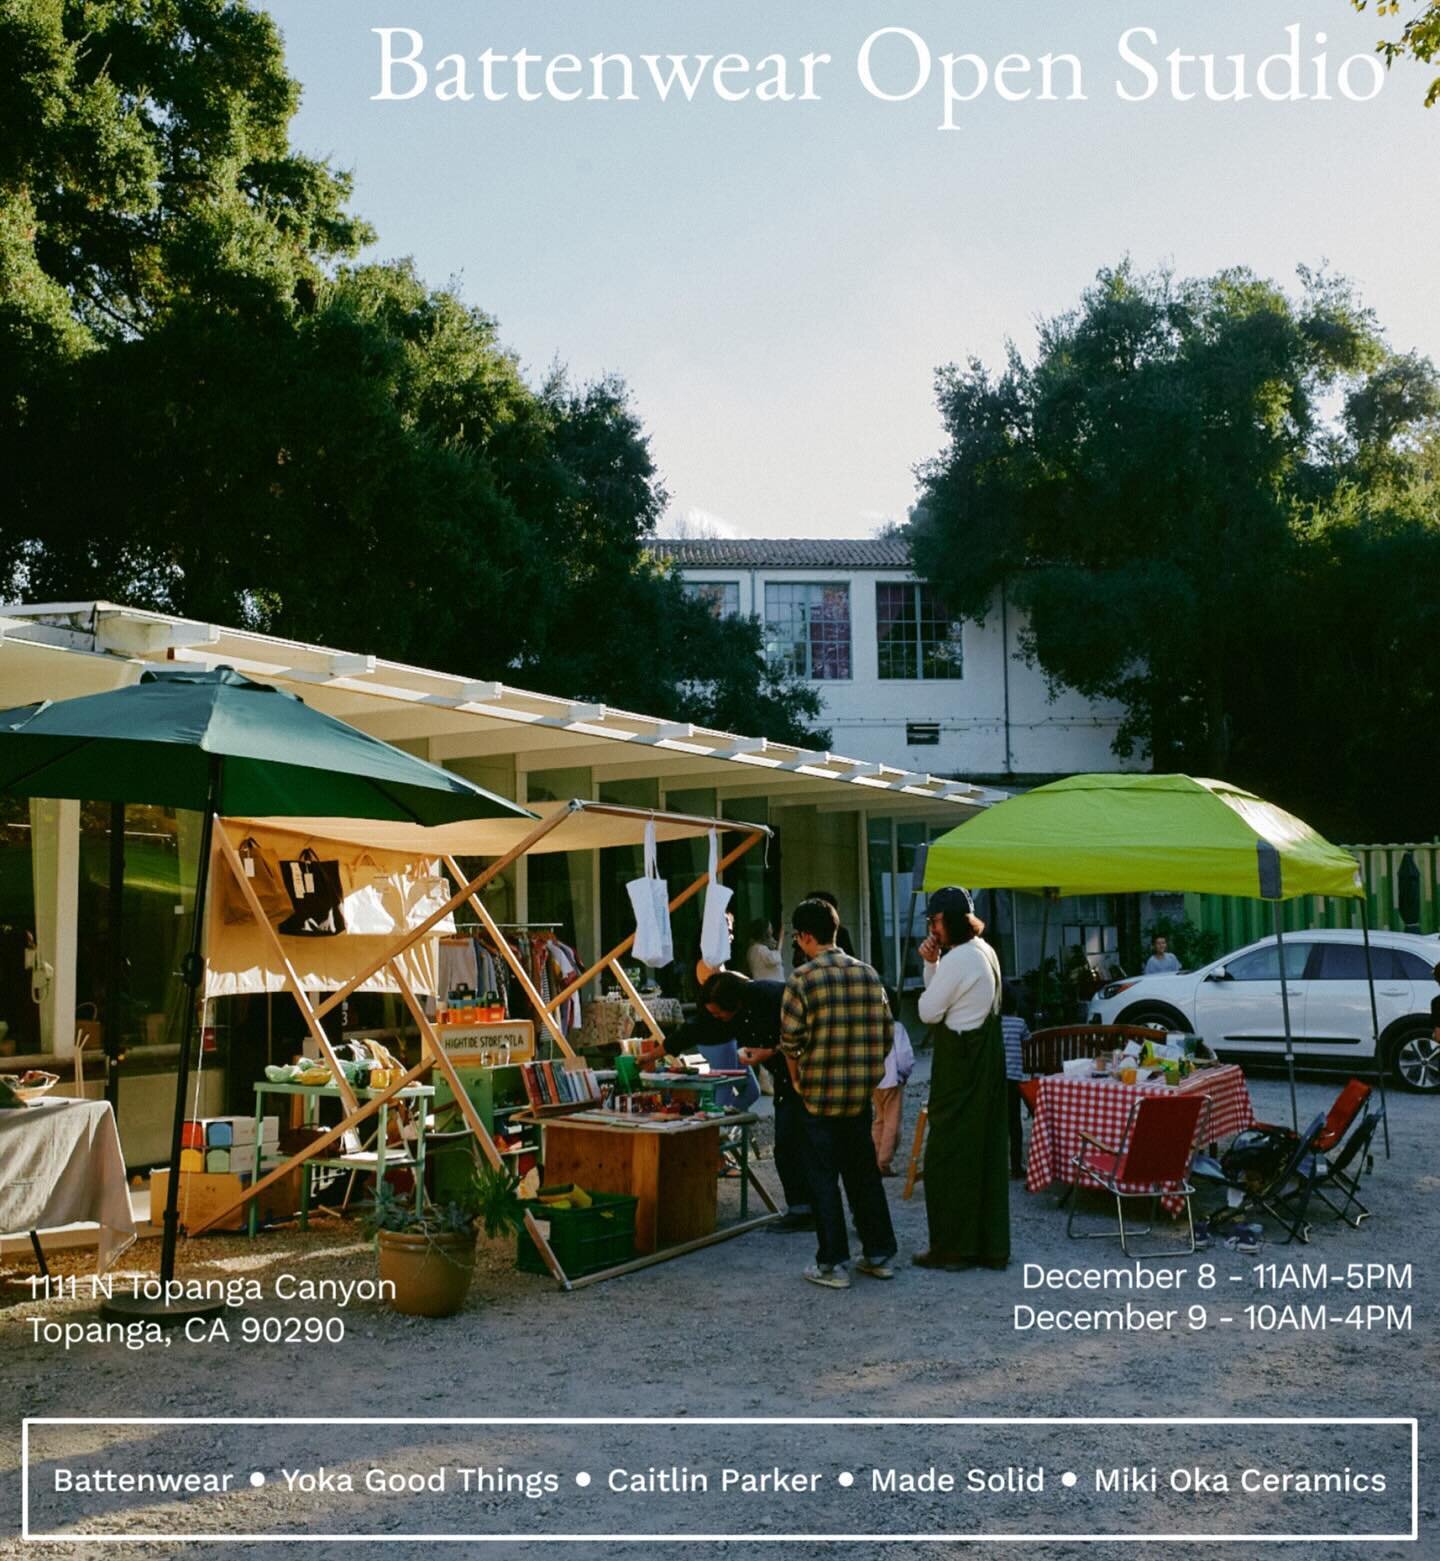 Come visit us at our pop up at the @battenwear Design Studio in Topanga Canyon this Friday and Saturday (Dec 8-9)! I&rsquo;ll be with my local friends @yoka_good_things , @madesolidinla and @mikiokaceramics 💛 I hope you can stop by!

Date: Friday De